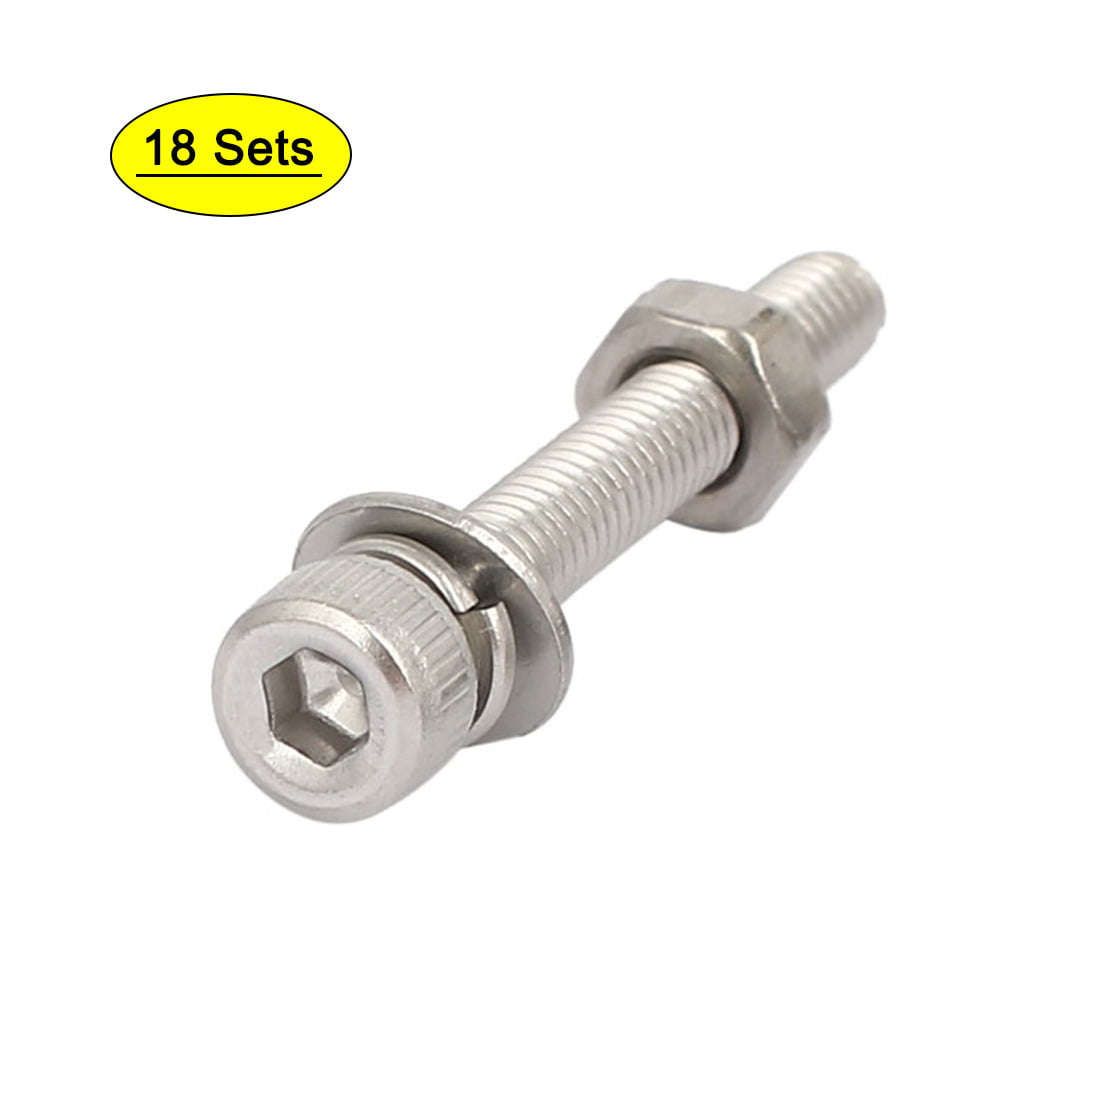 M4x30mm Nuts and Bolts 304 Stainless Steel Hex Socket Head Cap Screws and Nuts M4x30MM